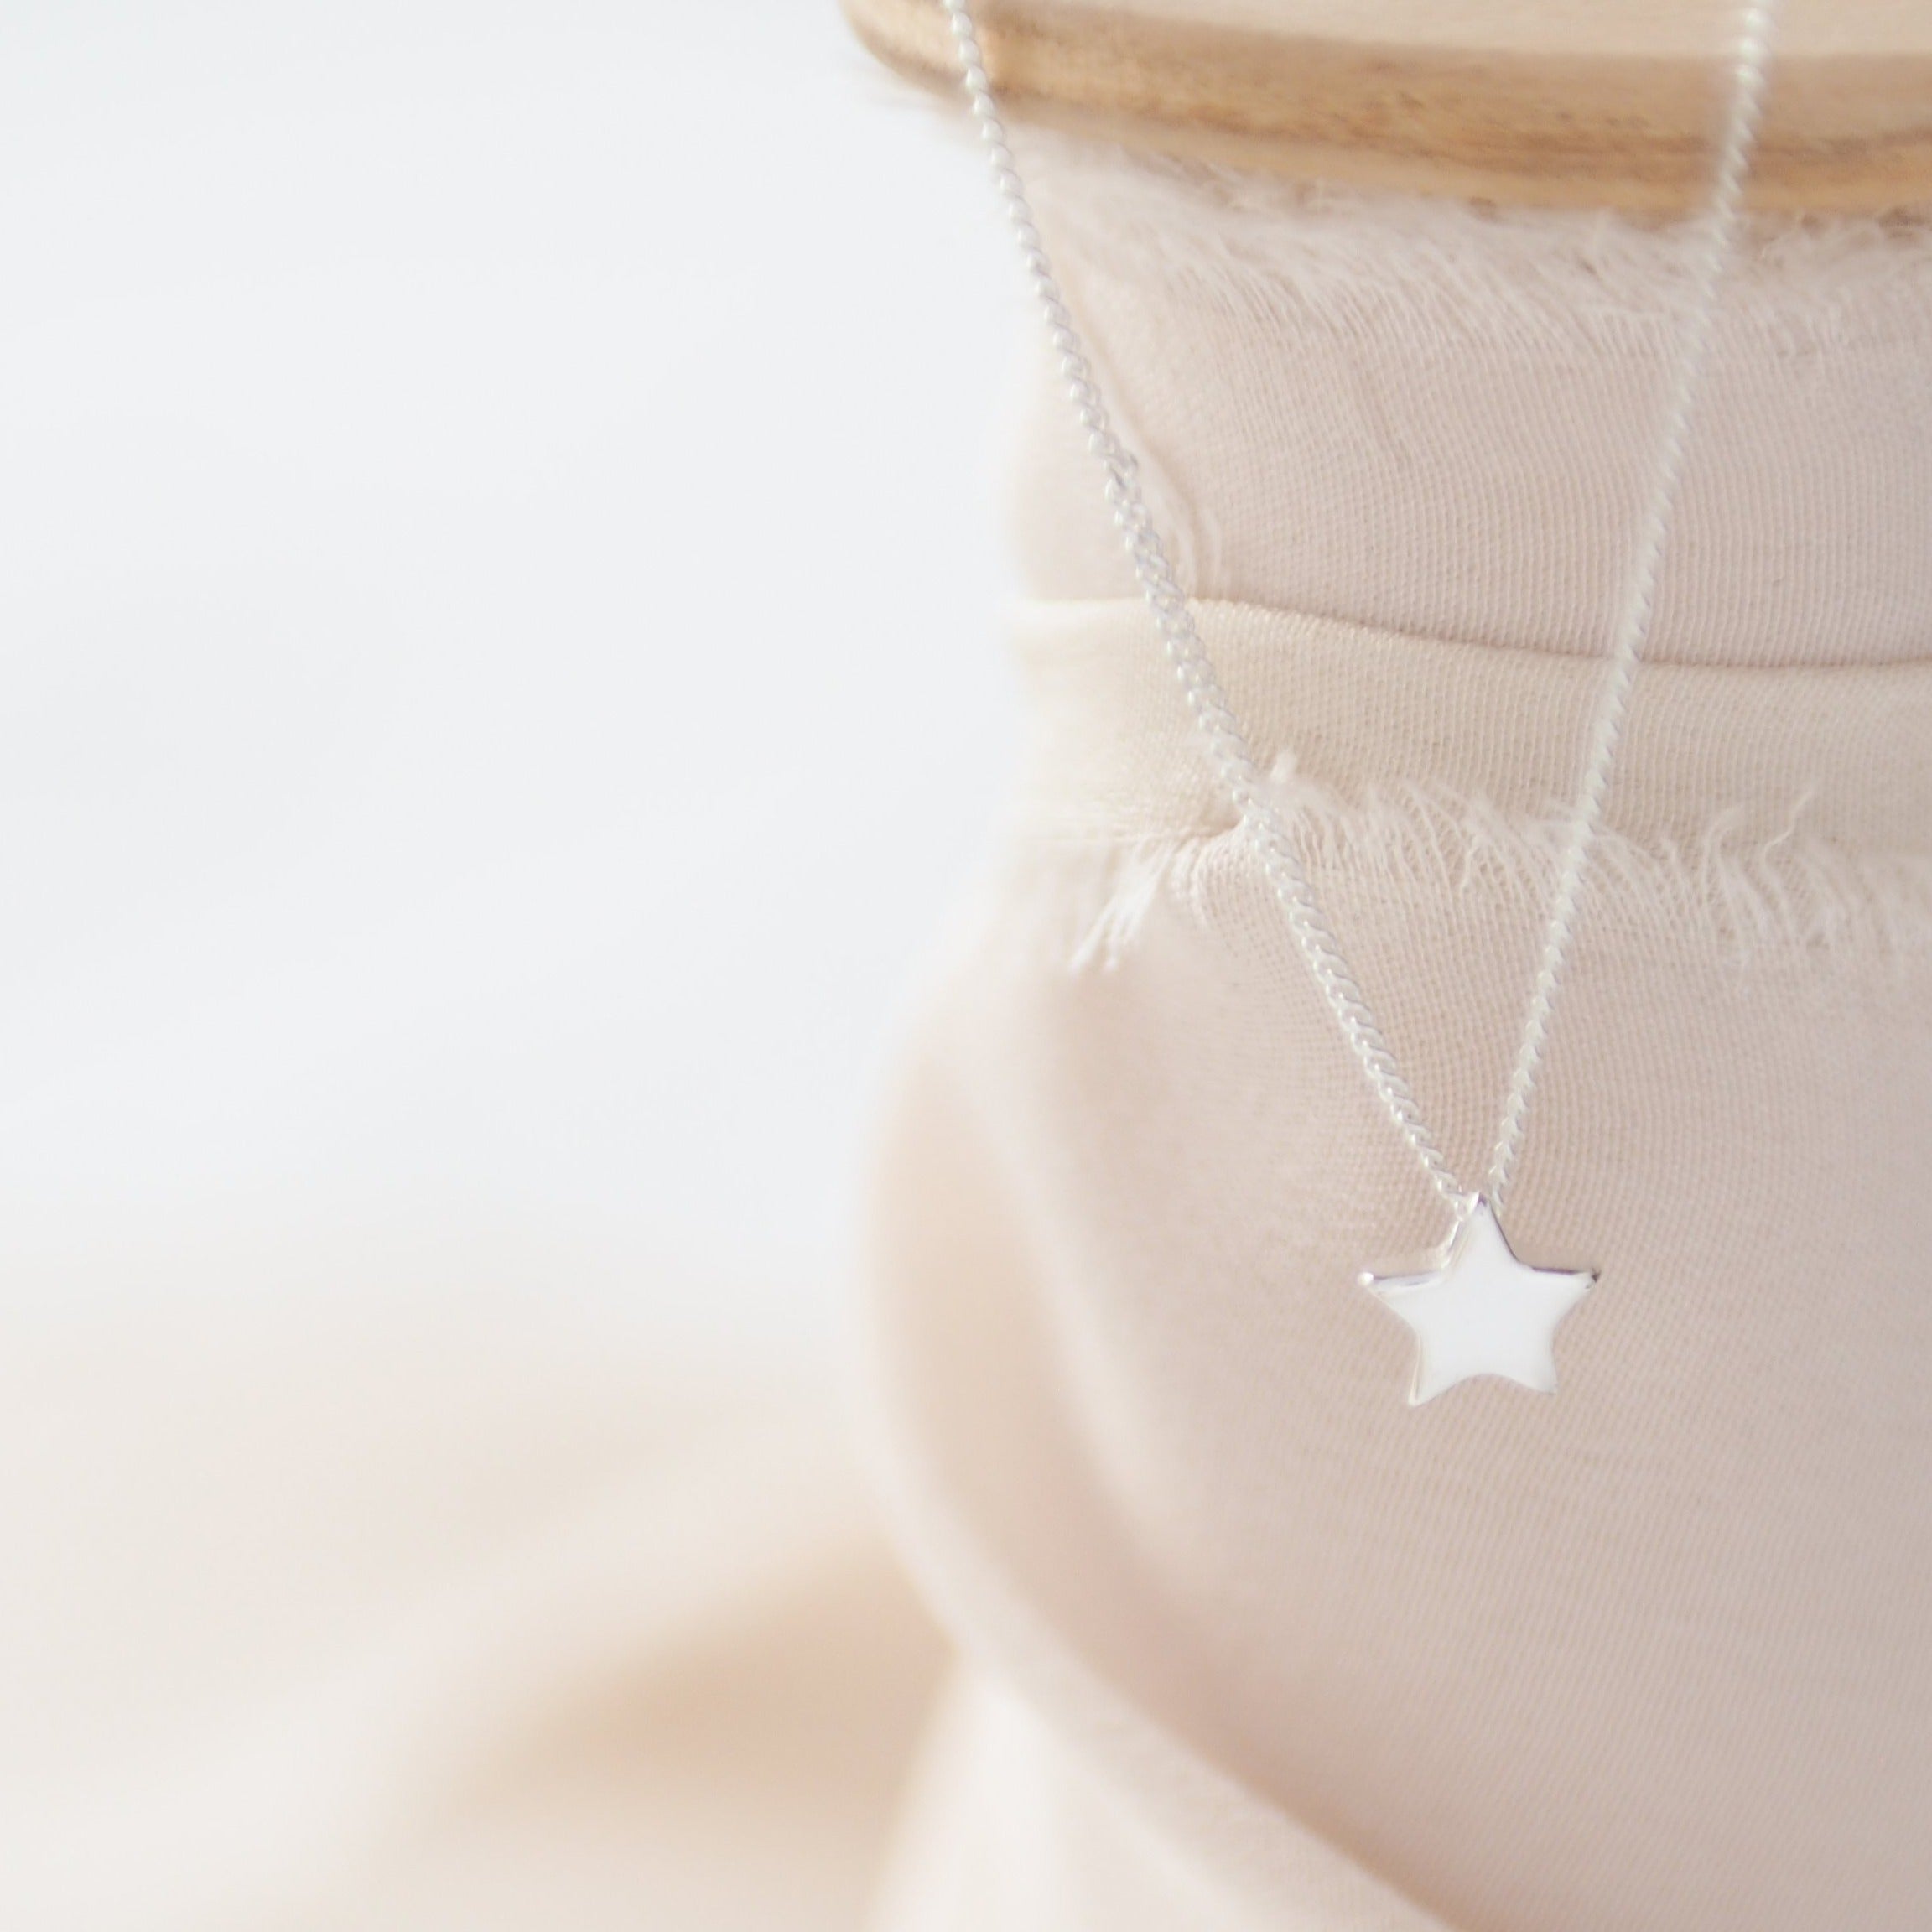 Star Necklace in Sterling Silver